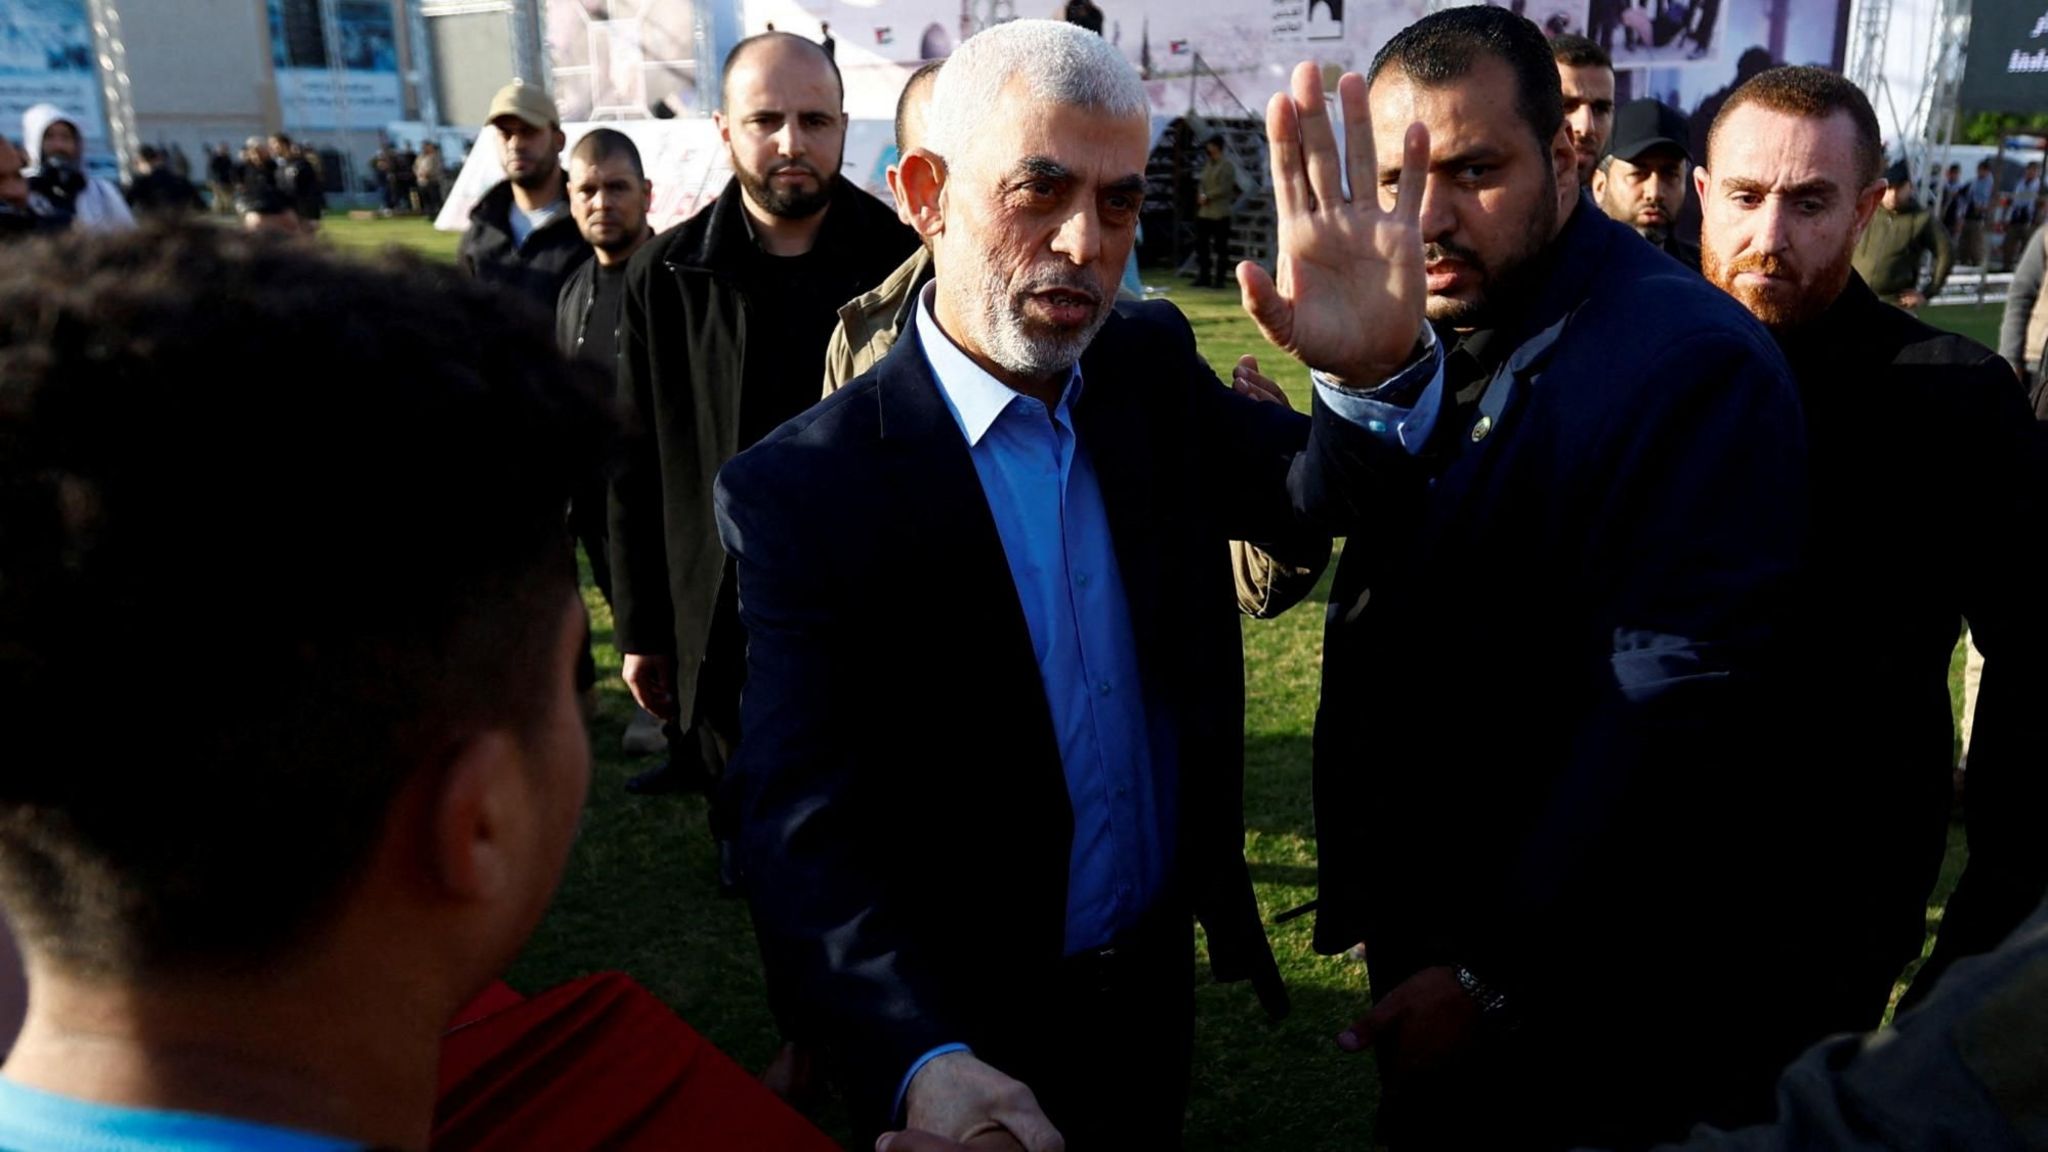 File photo showing Hamas leader Yahya Sinwar shaking hands with a man at a rally in Gaza on 14 April 2023